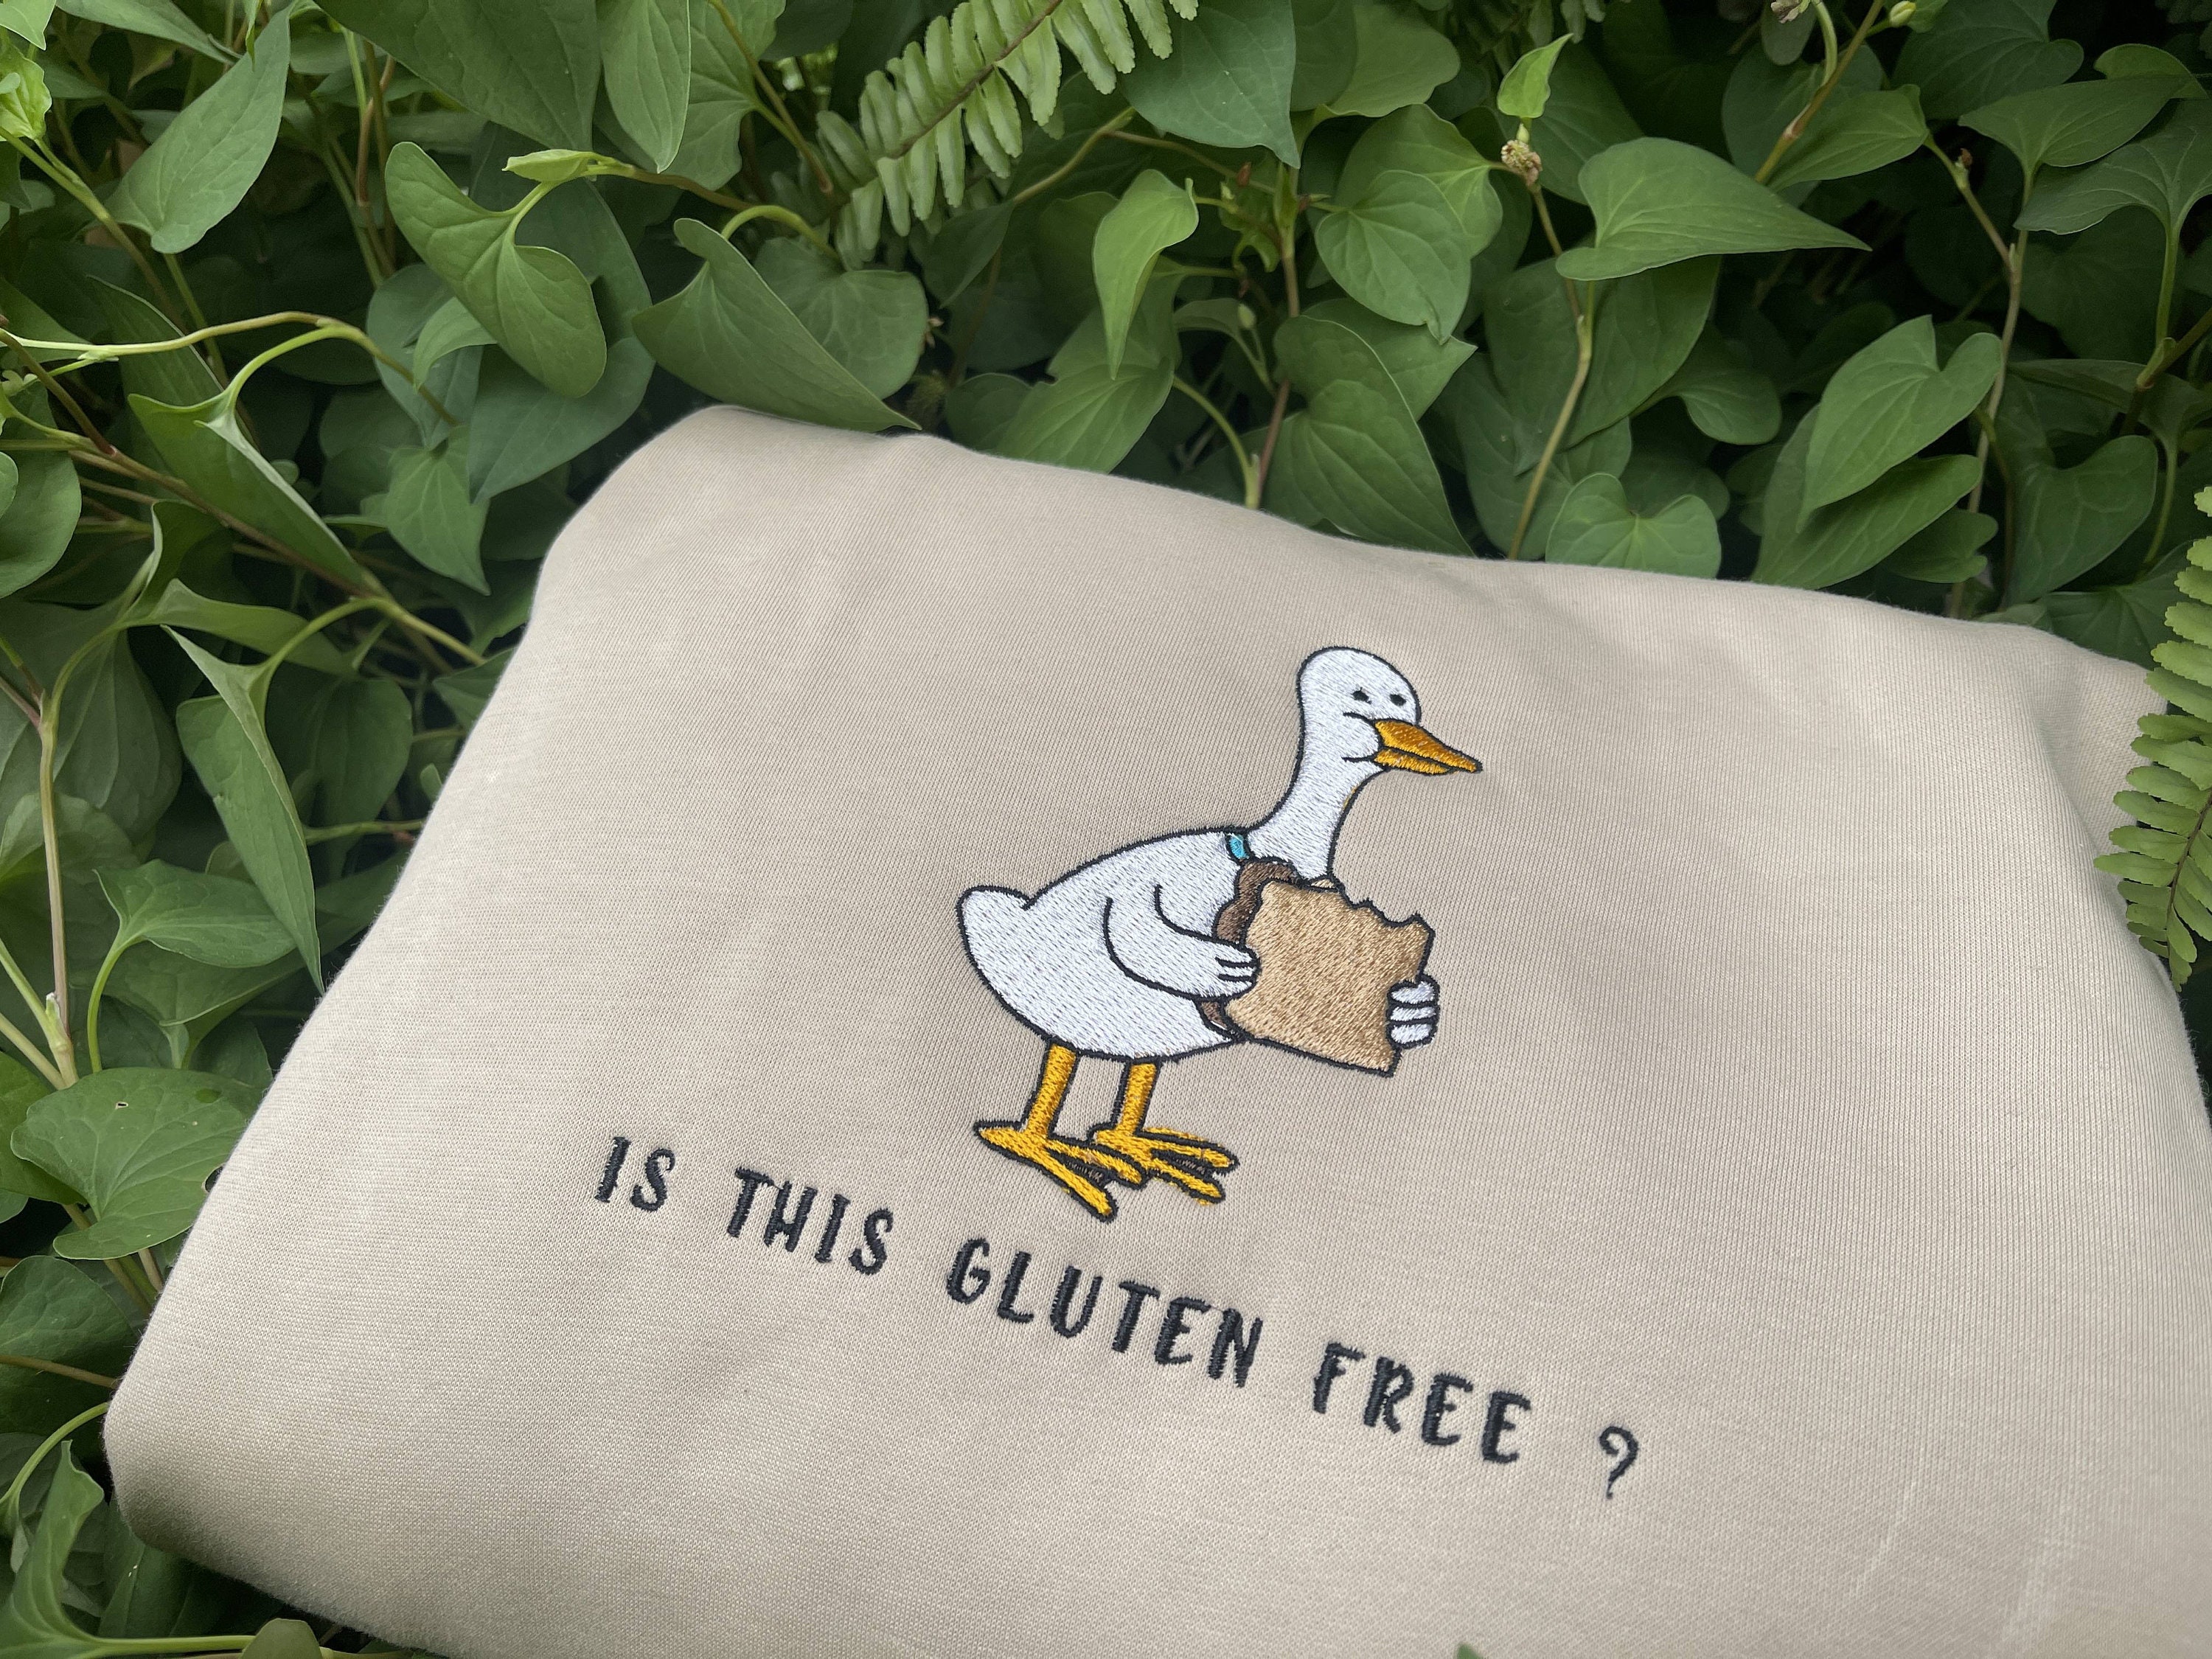 Discover Is This Gluten Free? Embroidered Sweatshirt, Cute Duck Crewneck, Funny Gluten Free Shirt, Embroidered Shirt EH054